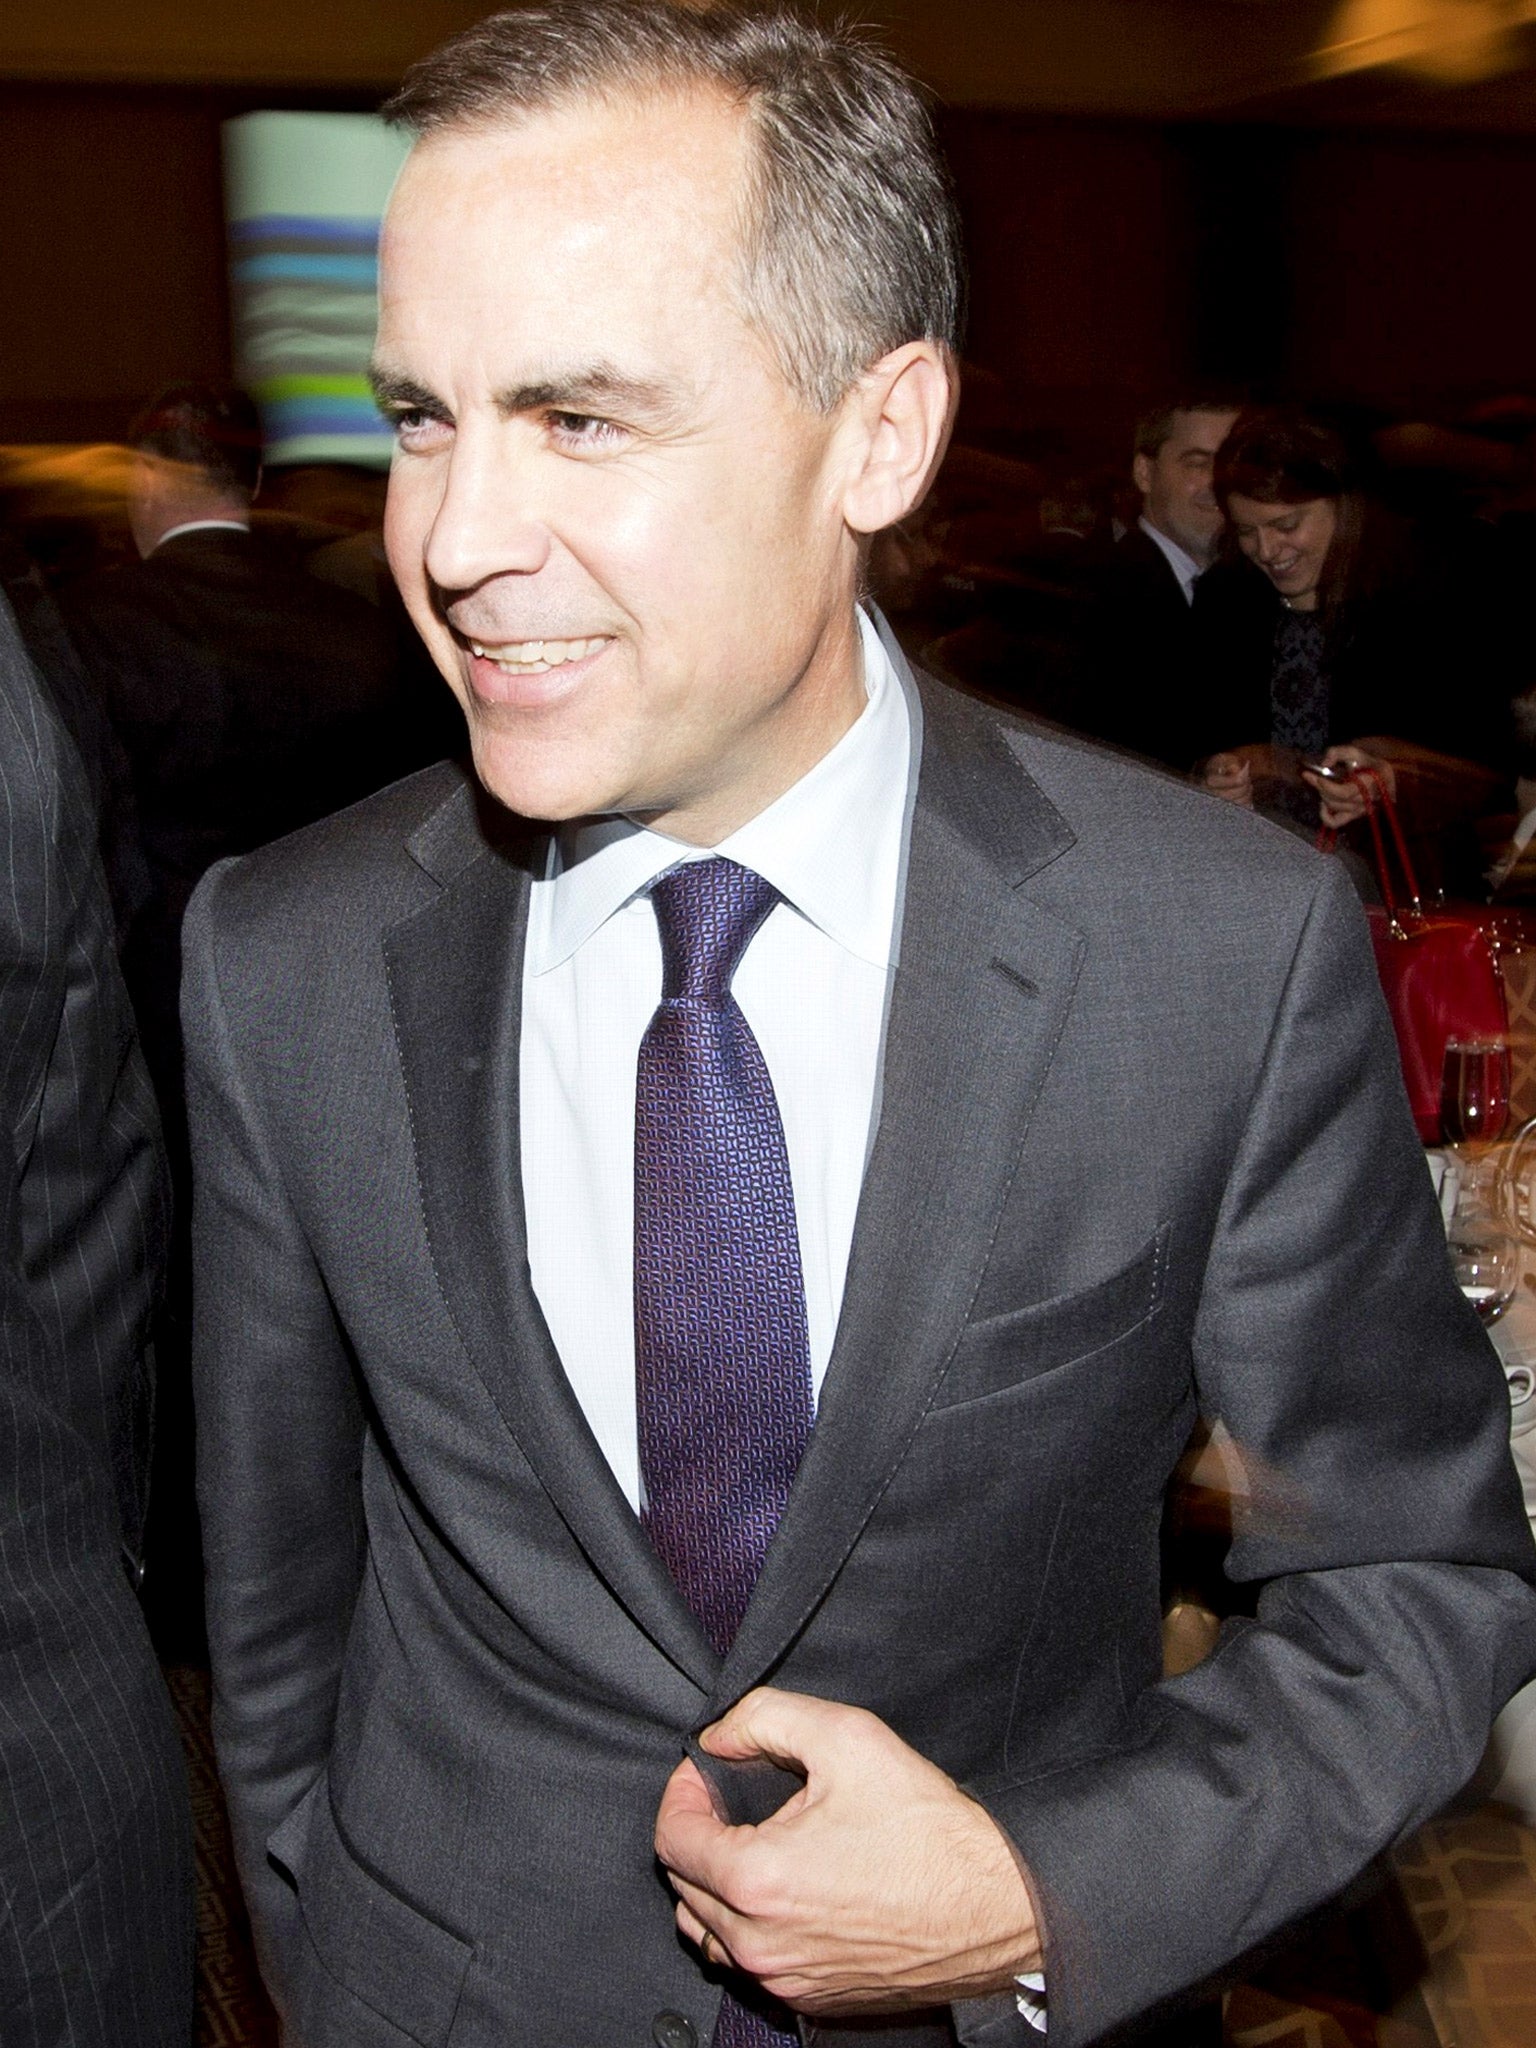 Mark Carney, the Bank of England’s next Governor